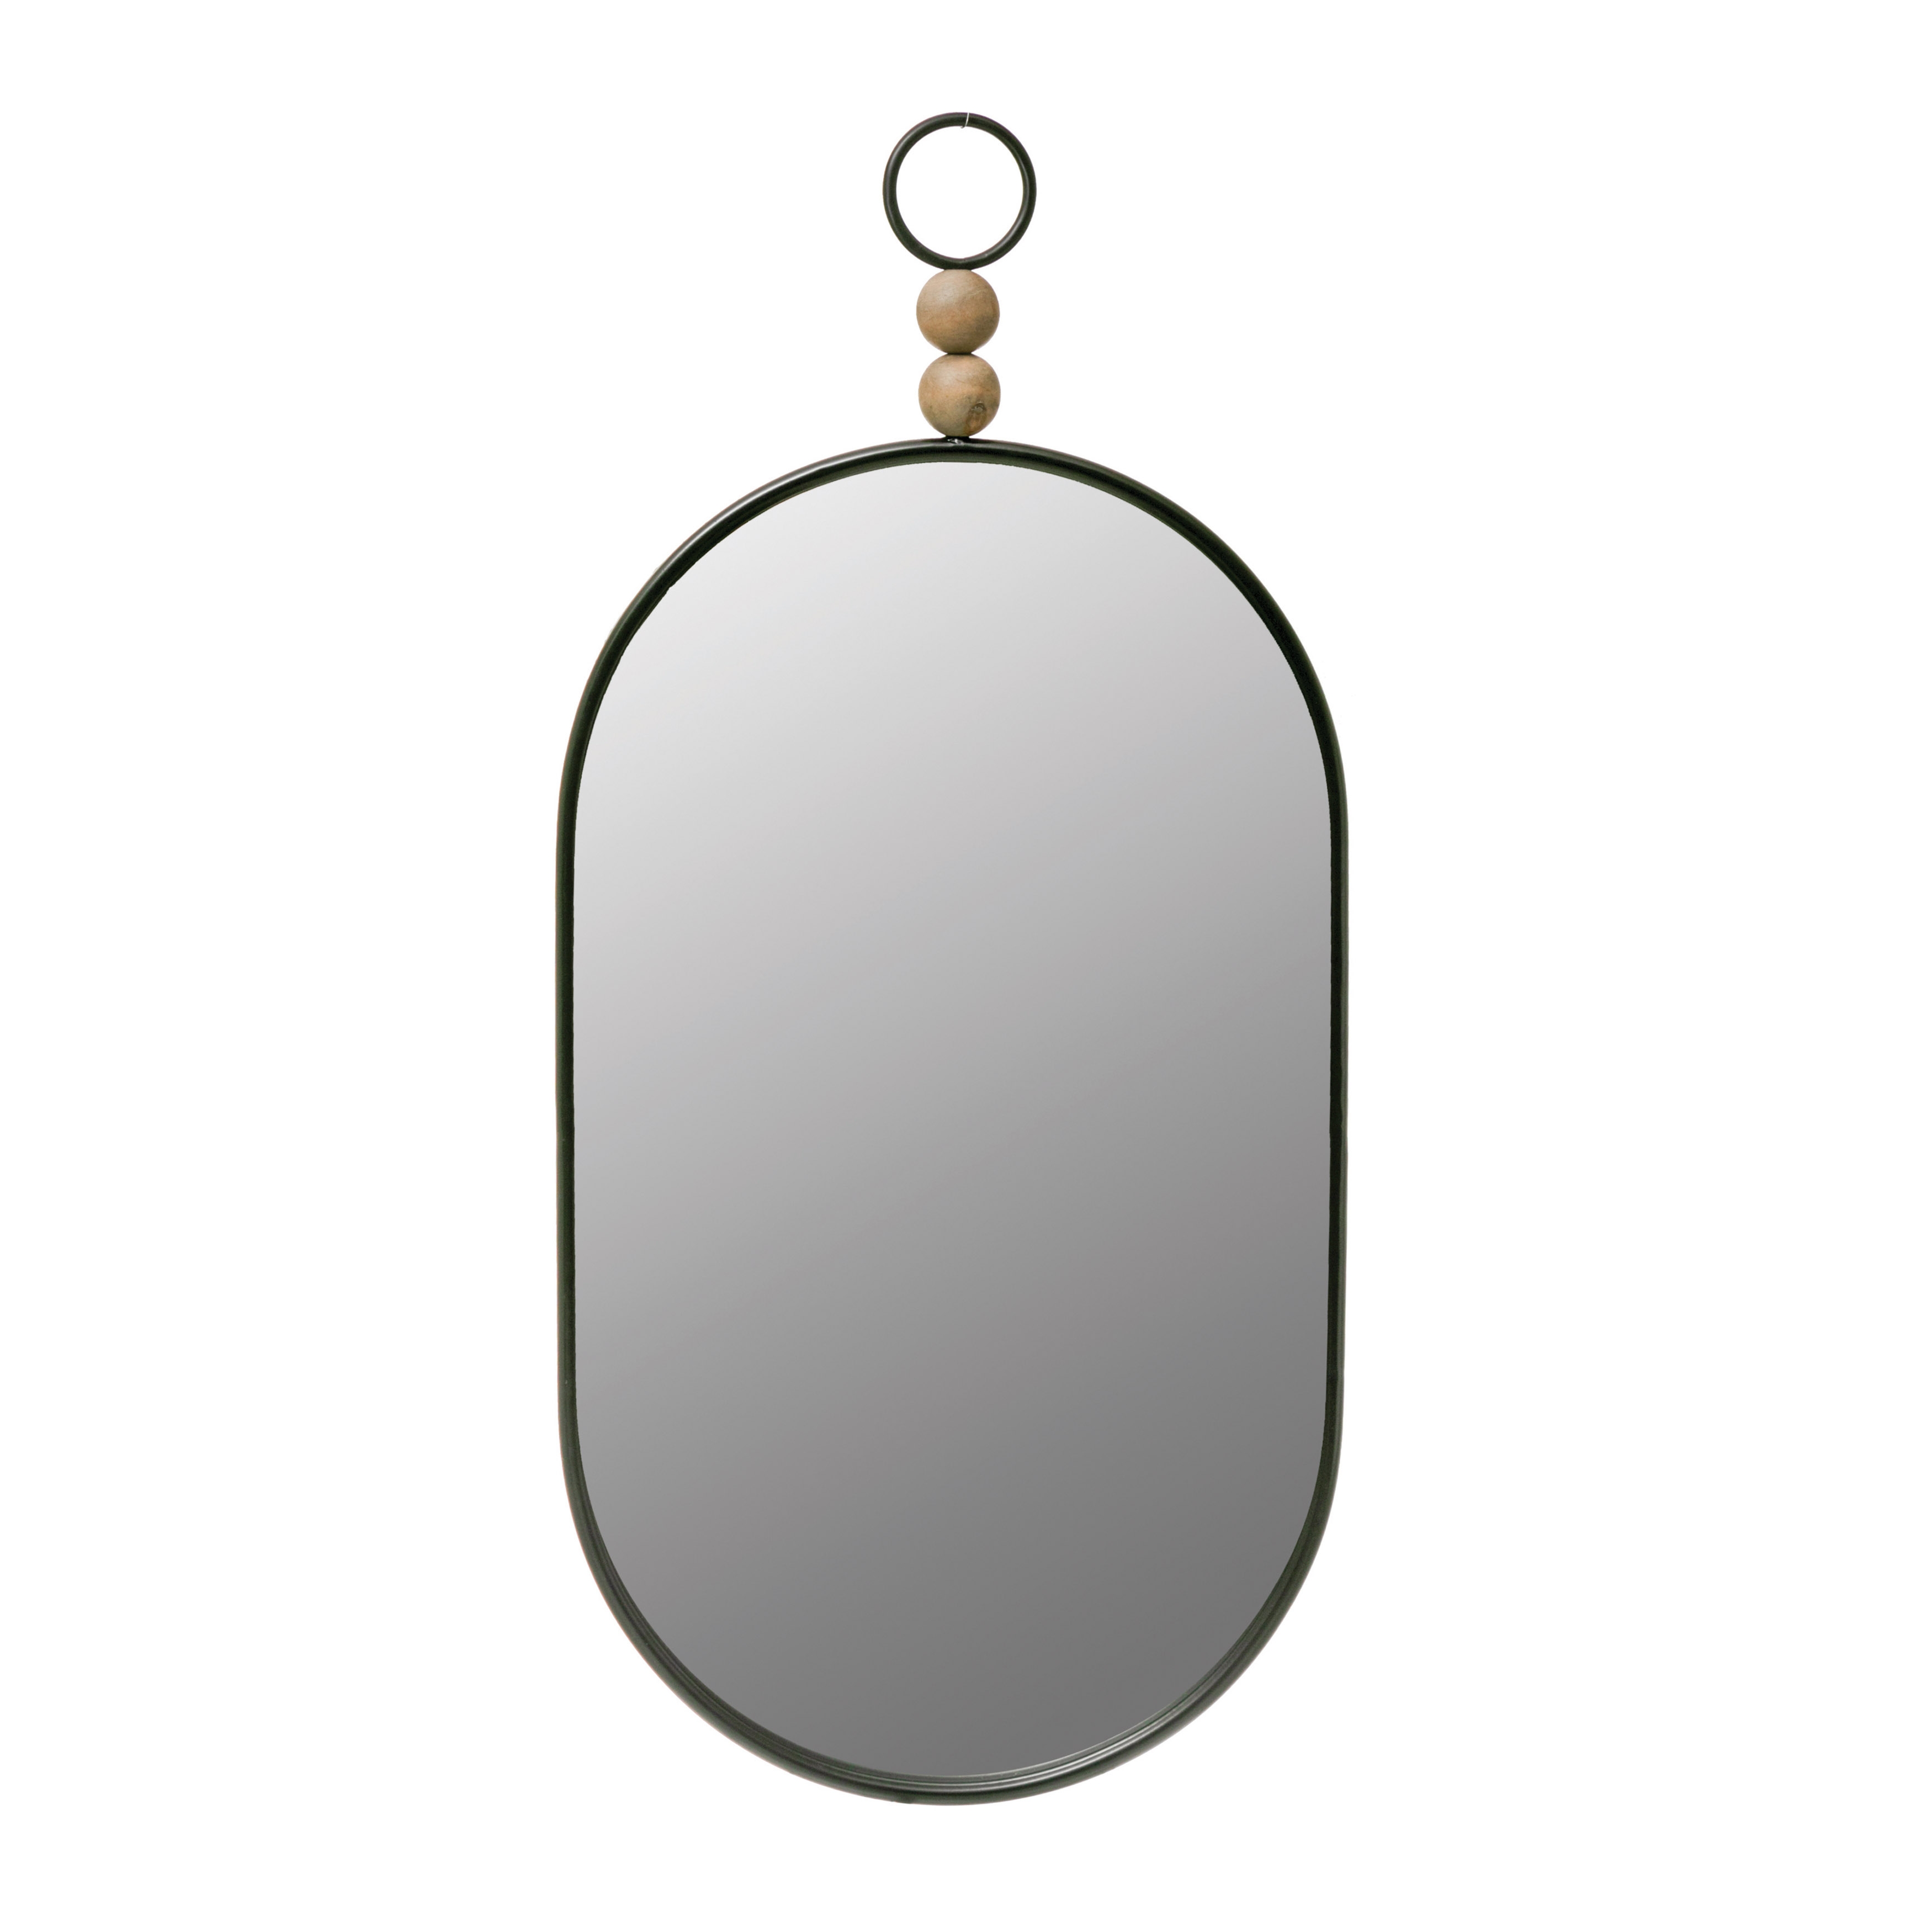 Oval Metal Framed Wall Mirror with Wood Beads, Black - Image 0